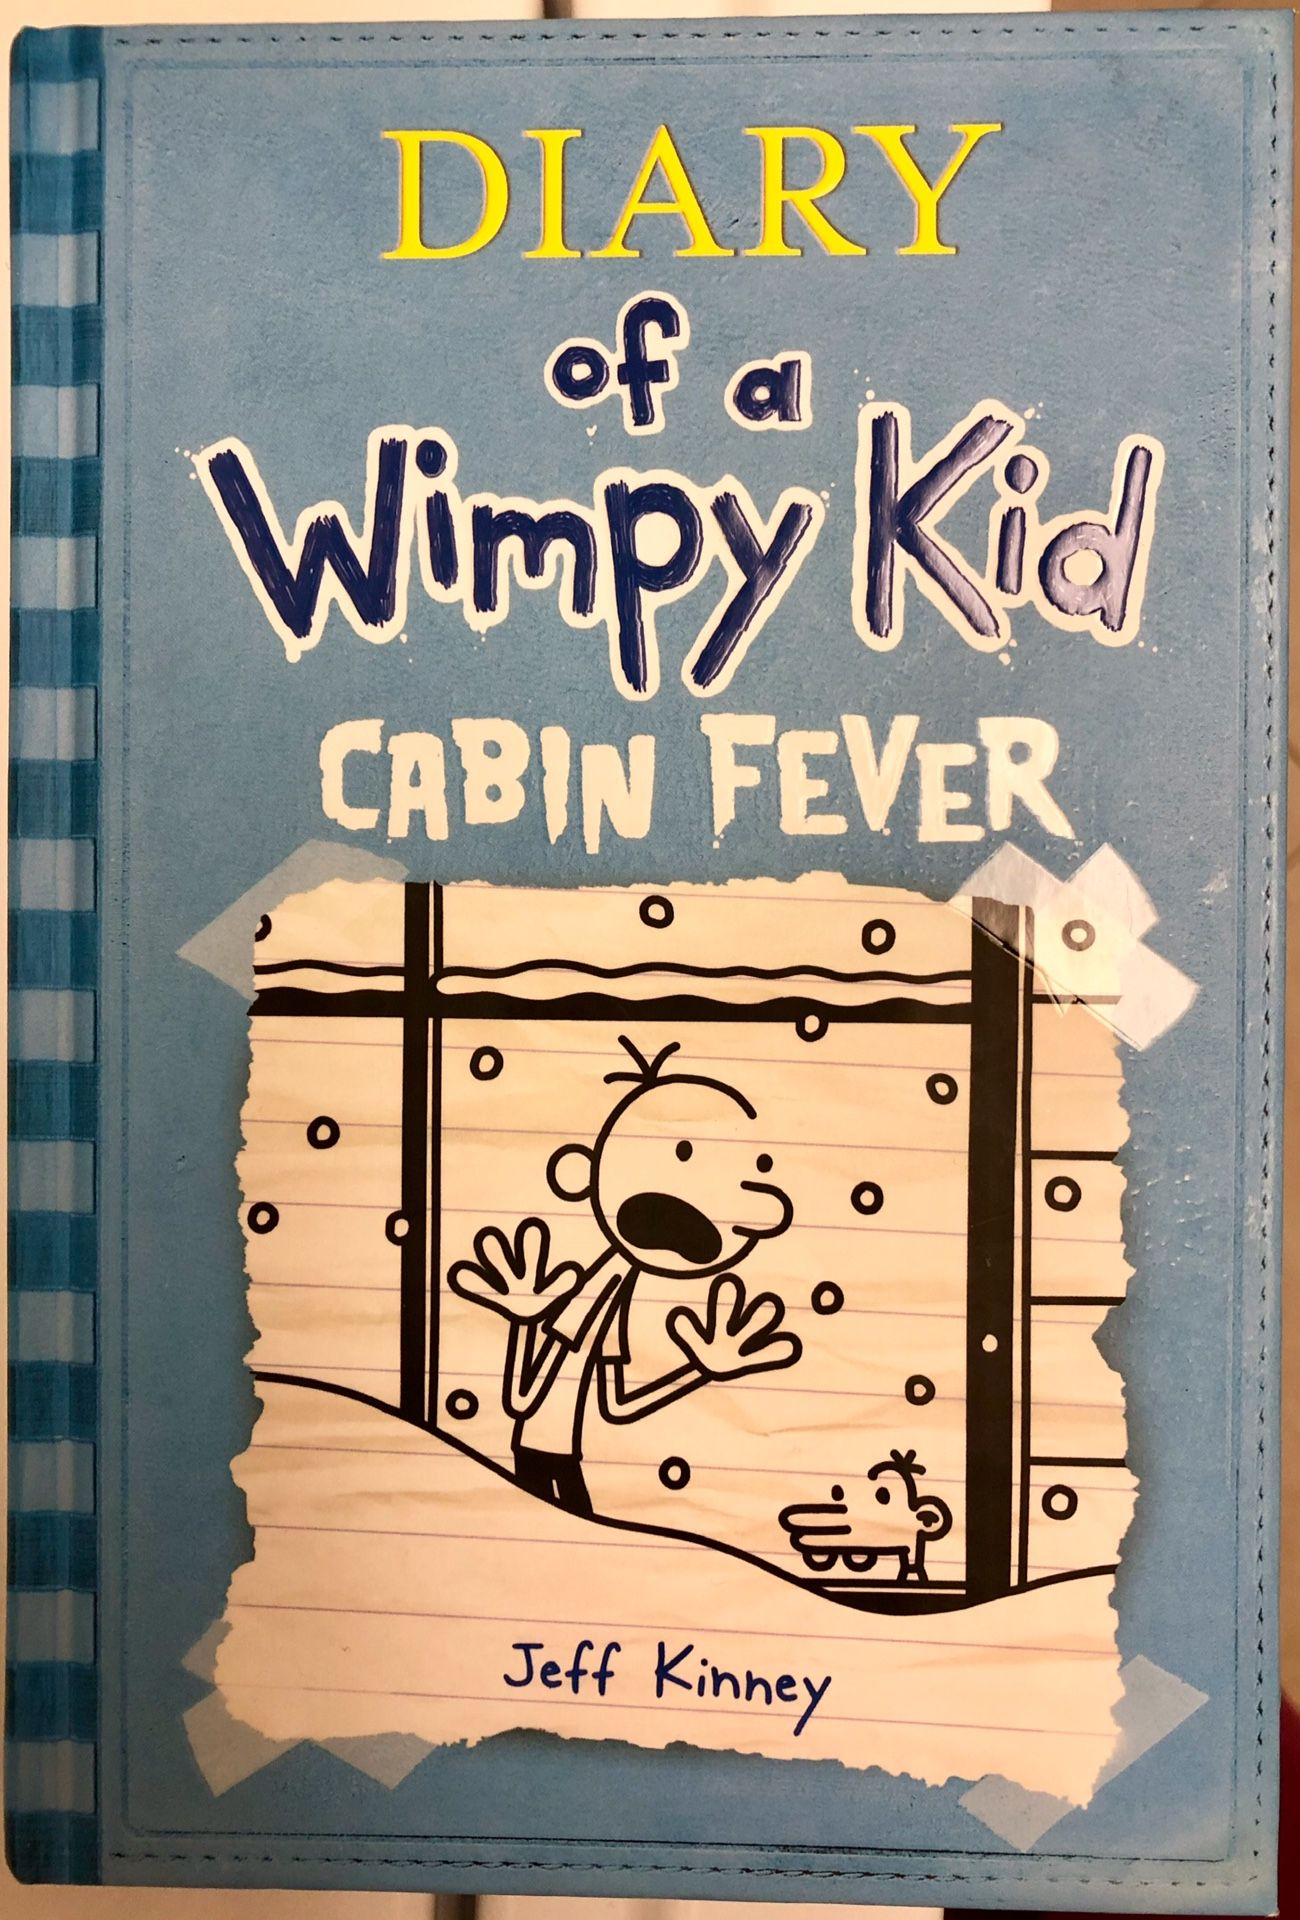 Diary of the Wimpy Kid Cabin Fever Hardcover Book New